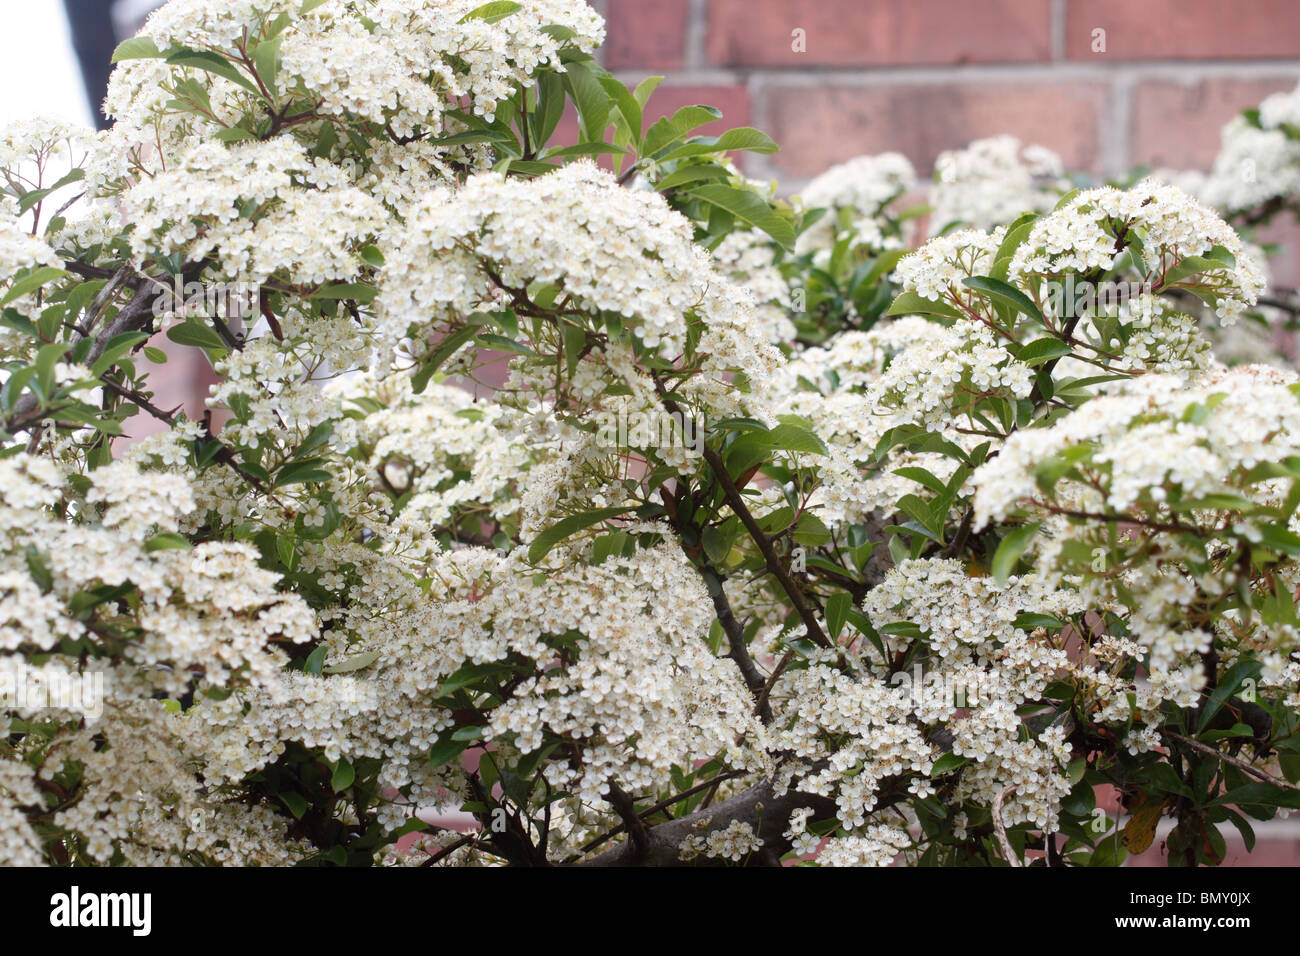 Firethorn, Pyracantha crenulata used as a boundary protecting plant, Masses of white flowers that will turn into orange berries Stock Photo